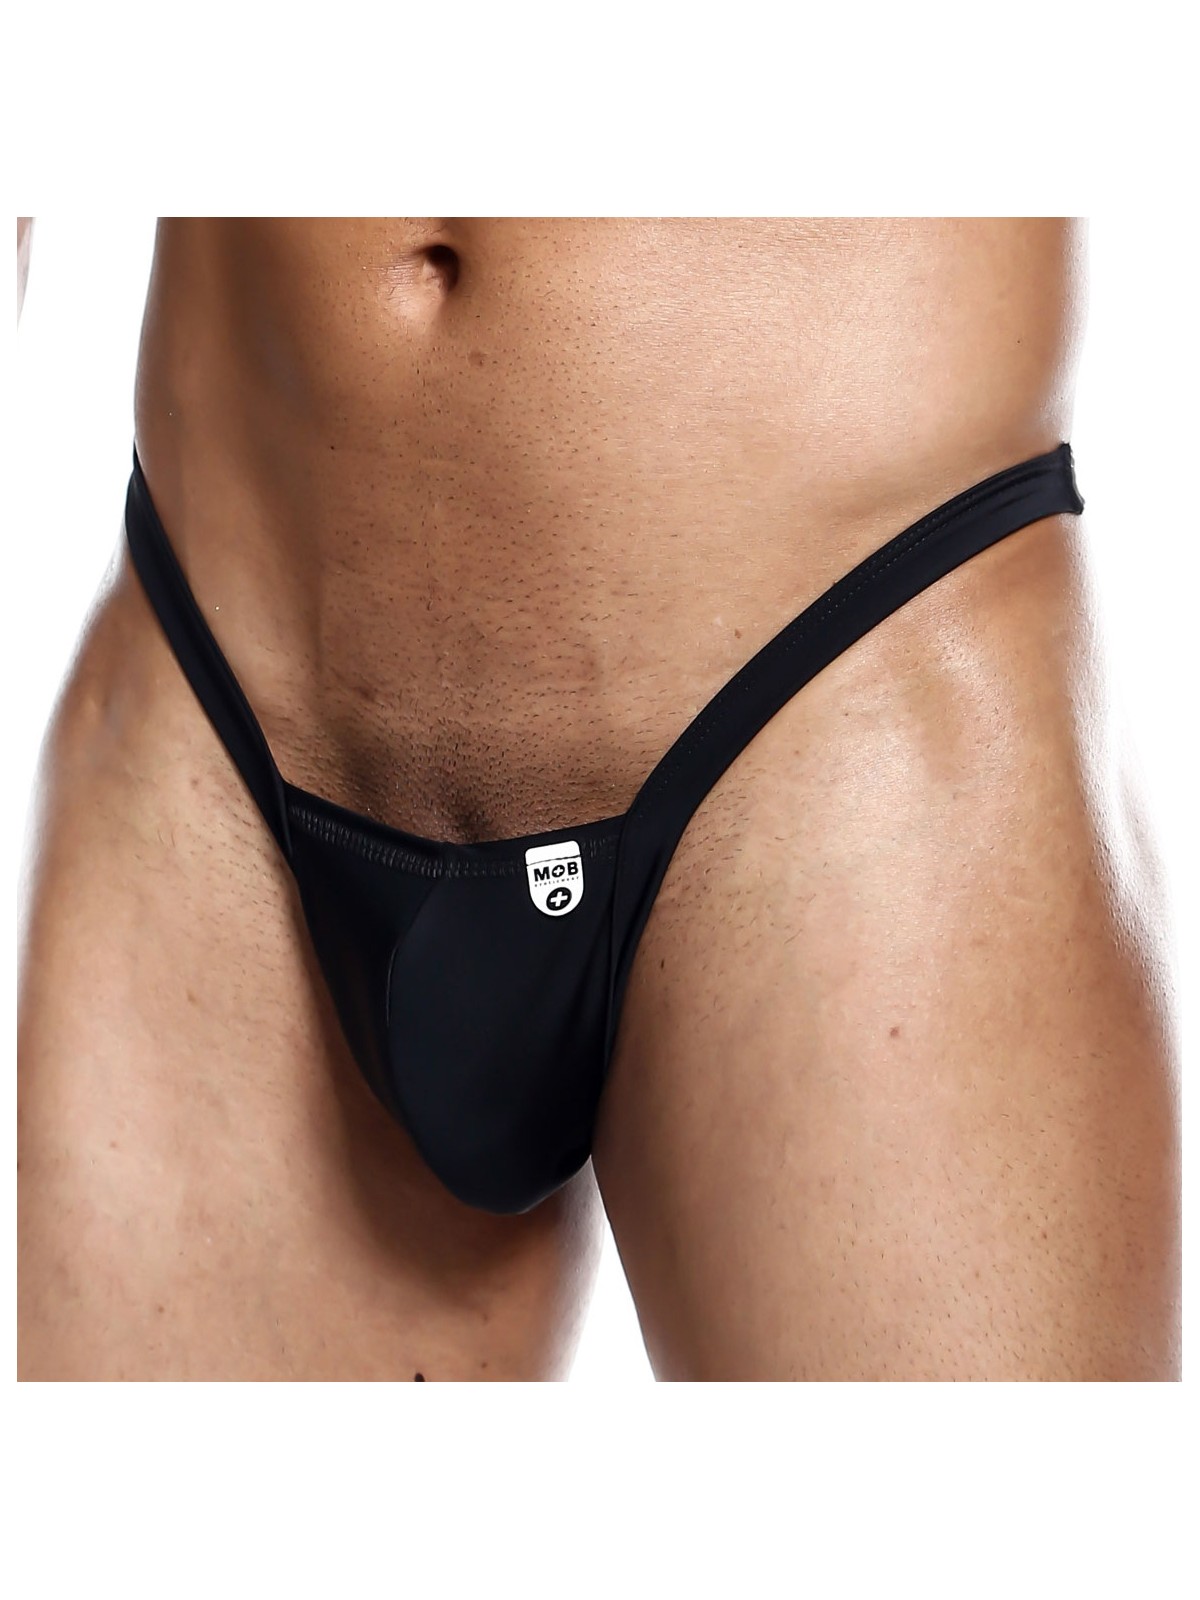 imports Thong BUNS Noir Tissu fin et confortable.Coupe sexy. Composition : 94% polyester, 6% Élasthanne 33,60 €